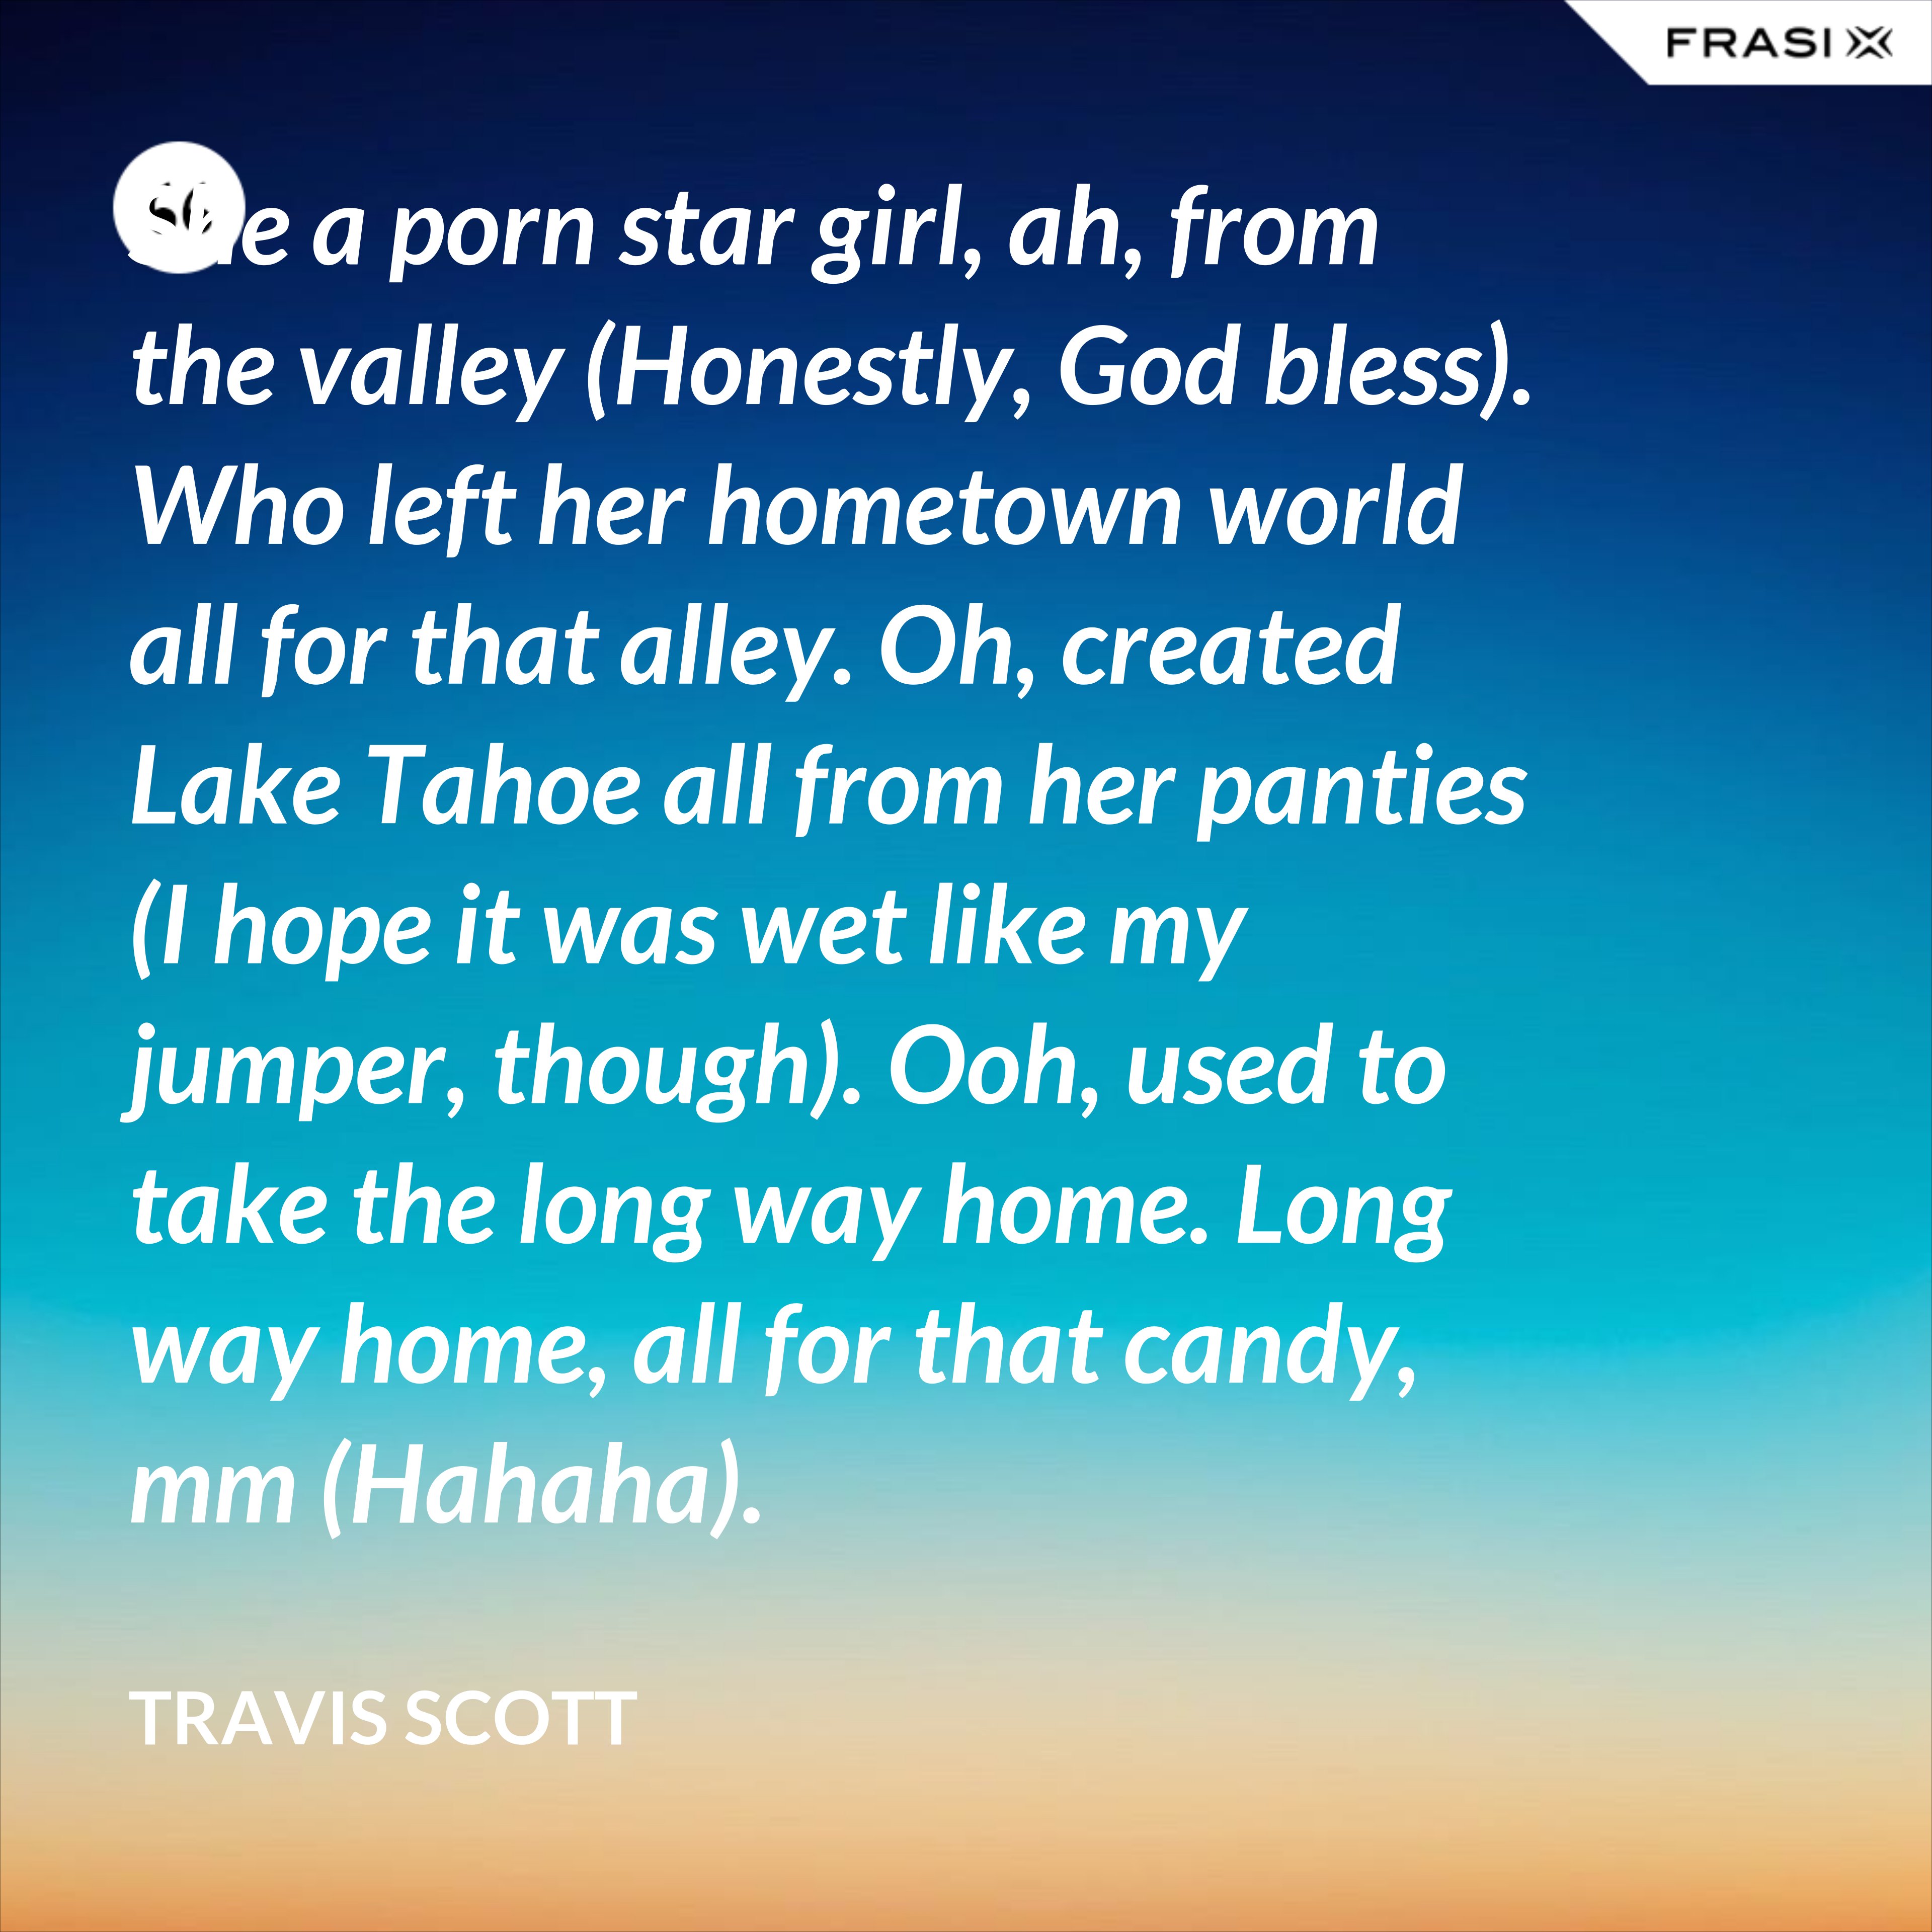 She a porn star girl, ah, from the valley (Honestly, God bless). Who left her hometown world all for that alley. Oh, created Lake Tahoe all from her panties (I hope it was wet like my jumper, though). Ooh, used to take the long way home. Long way home, all for that candy, mm (Hahaha). - Travis Scott